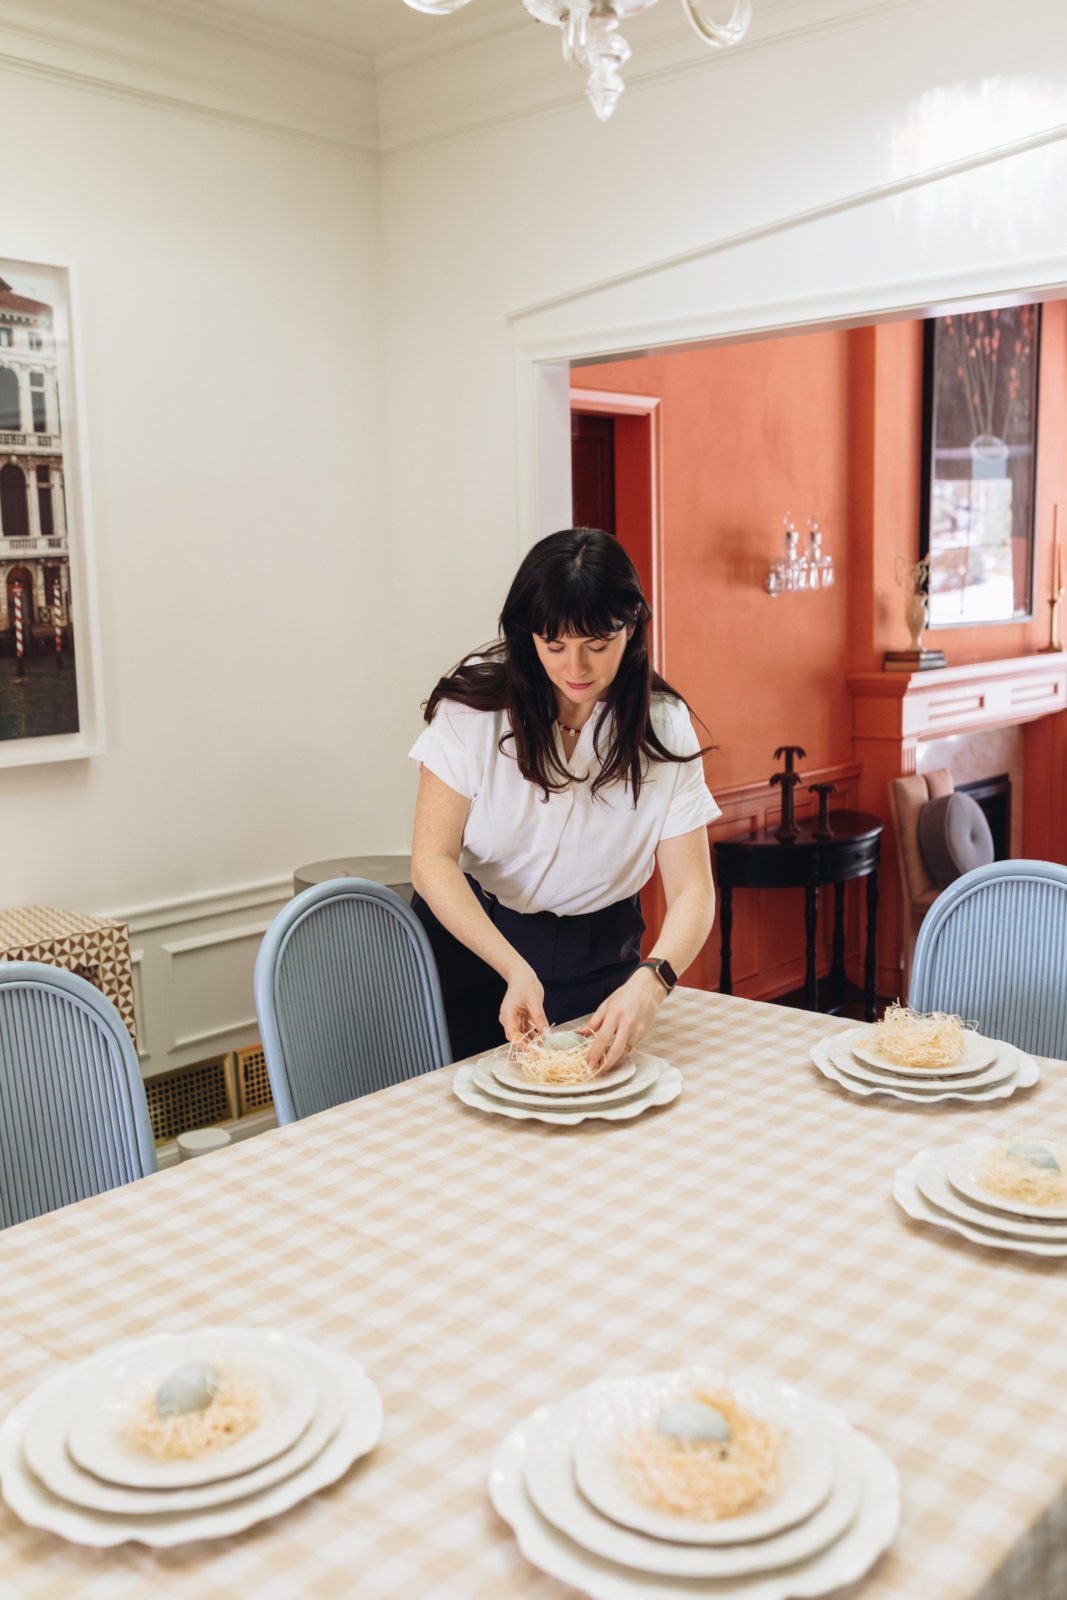 Woman setting a table in a bright and airy dining room. The woman is placing a handmade nest on top of a plate to serve as a placeholder.